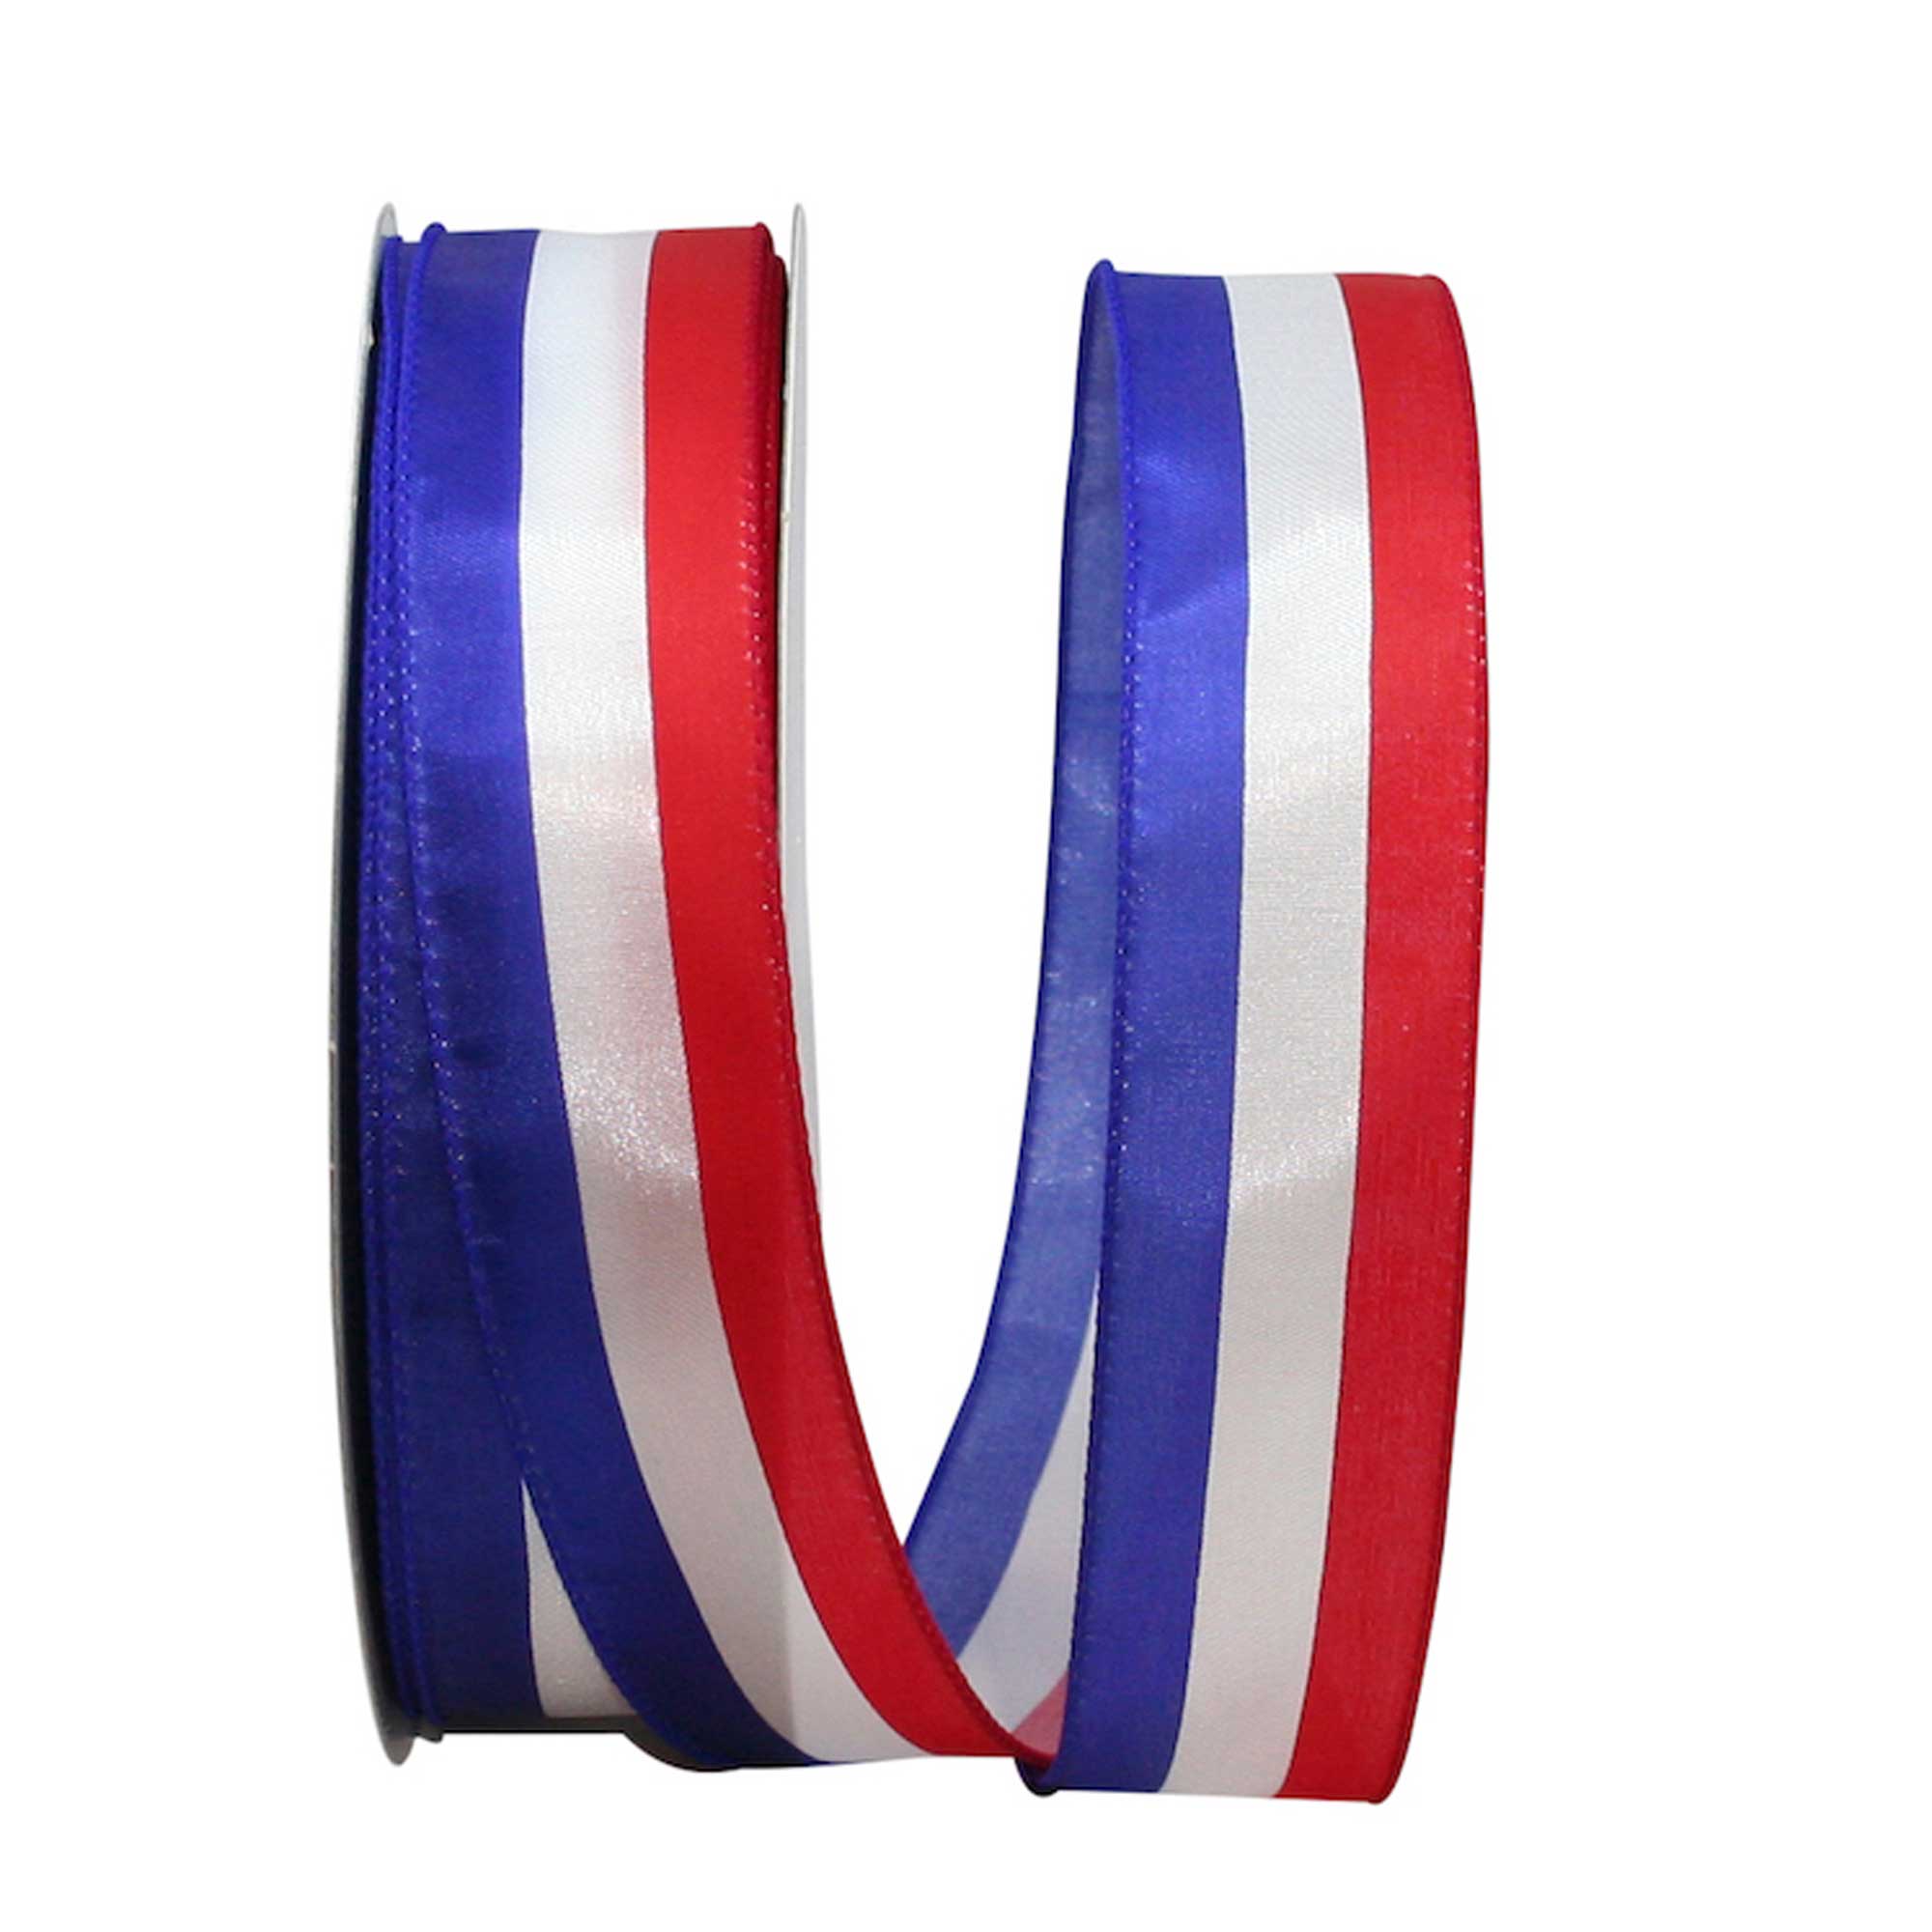 50 Feet Patriotic USA Red White and Blue Waterproof Acetate Ribbon 1 1/4W